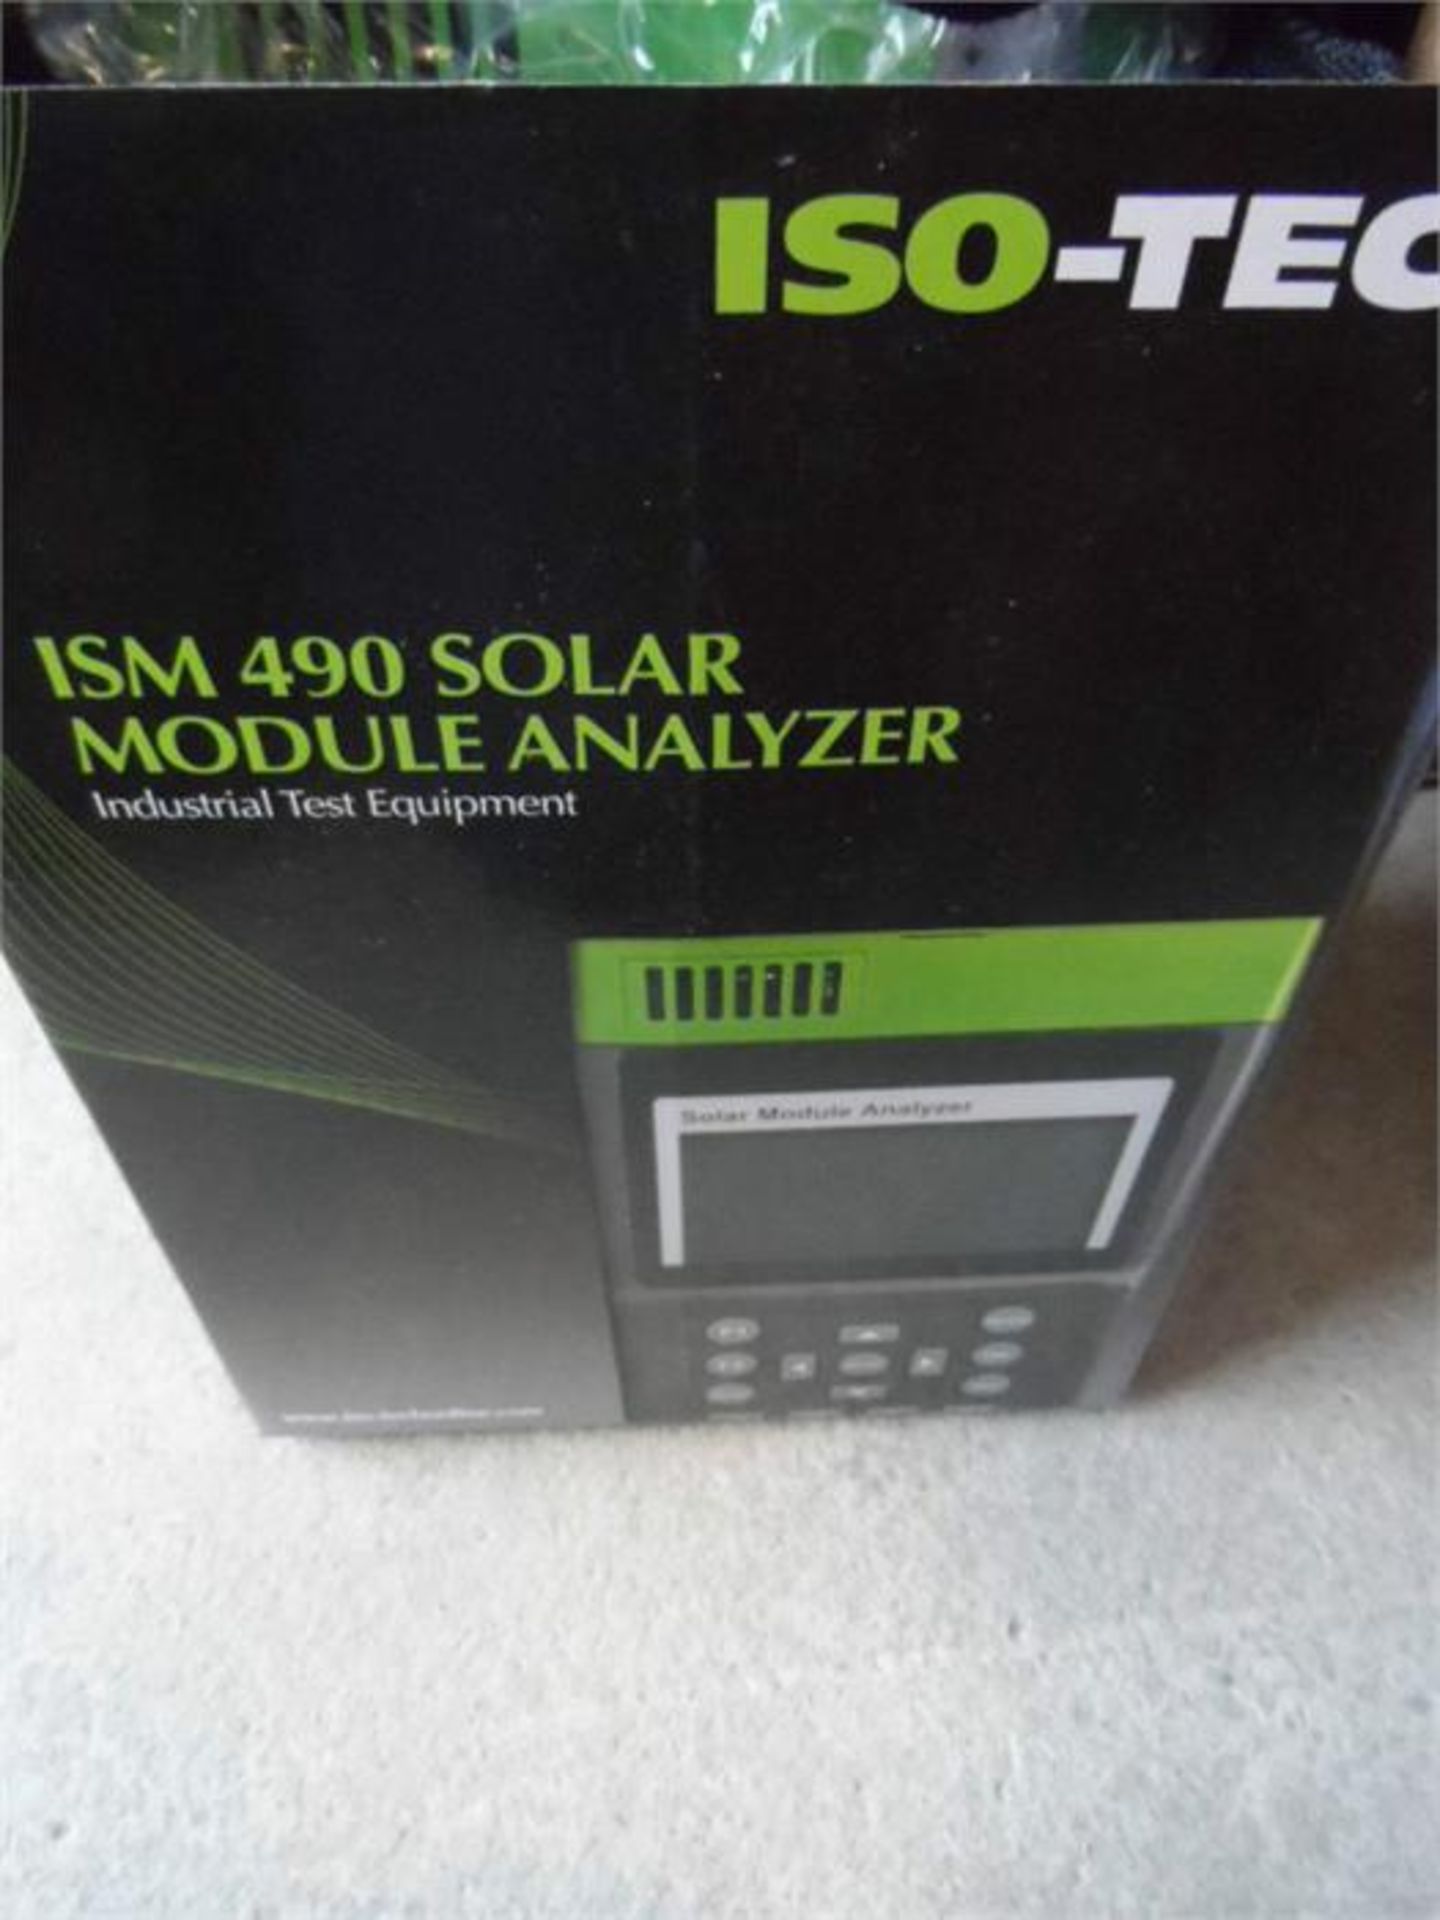 Photo Voltaic Cell Analyser - Solar Panel Analyser - Image 8 of 8